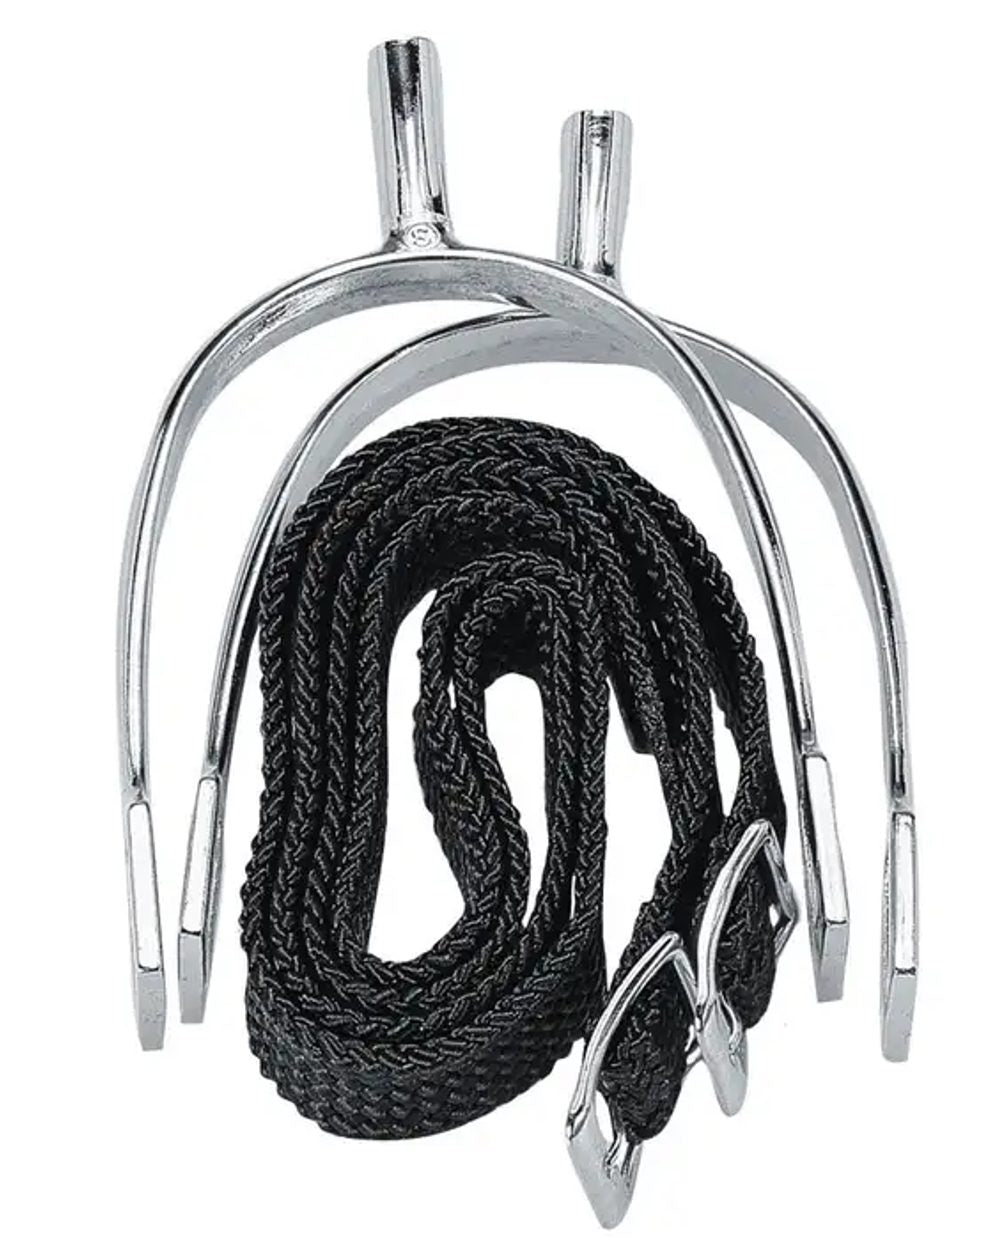 Korsteel Mens Pow Never Rust Spurs With Straps on white background